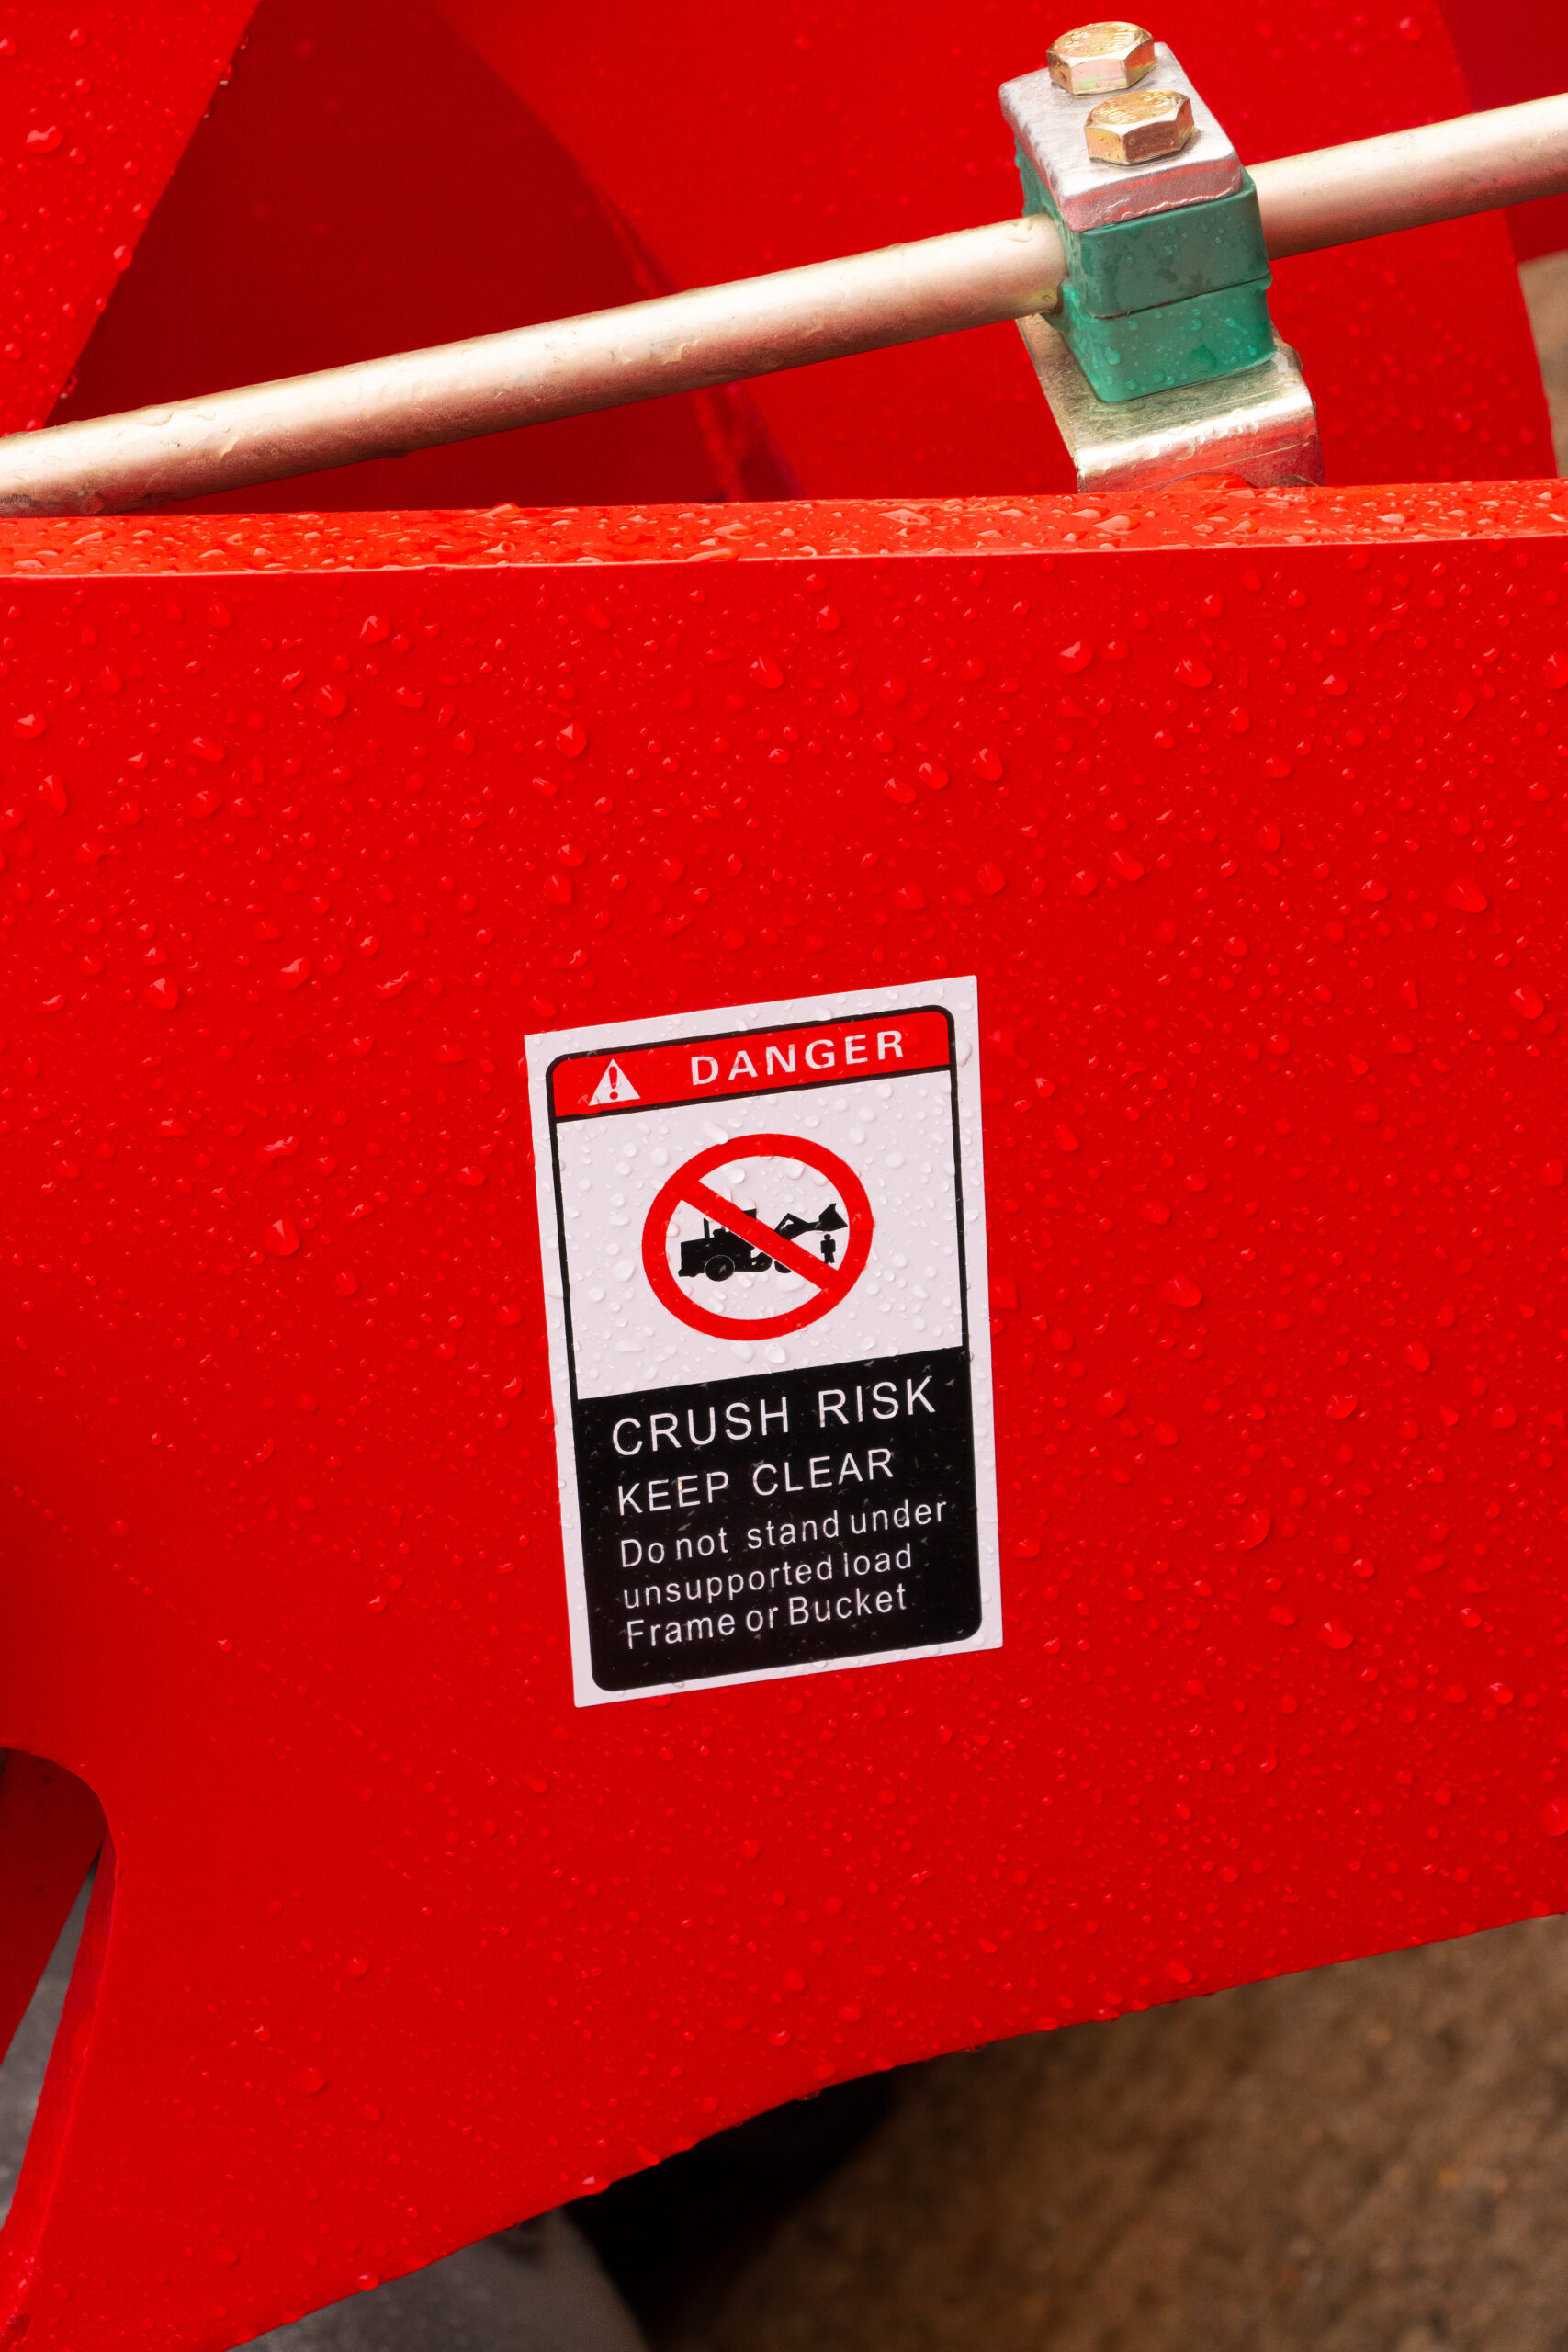 Danger warning sign of Crush Risk with symbol and Keep clear of frame or bucket on red forklift and tractor. Norfolk, UK - October 4th 2020